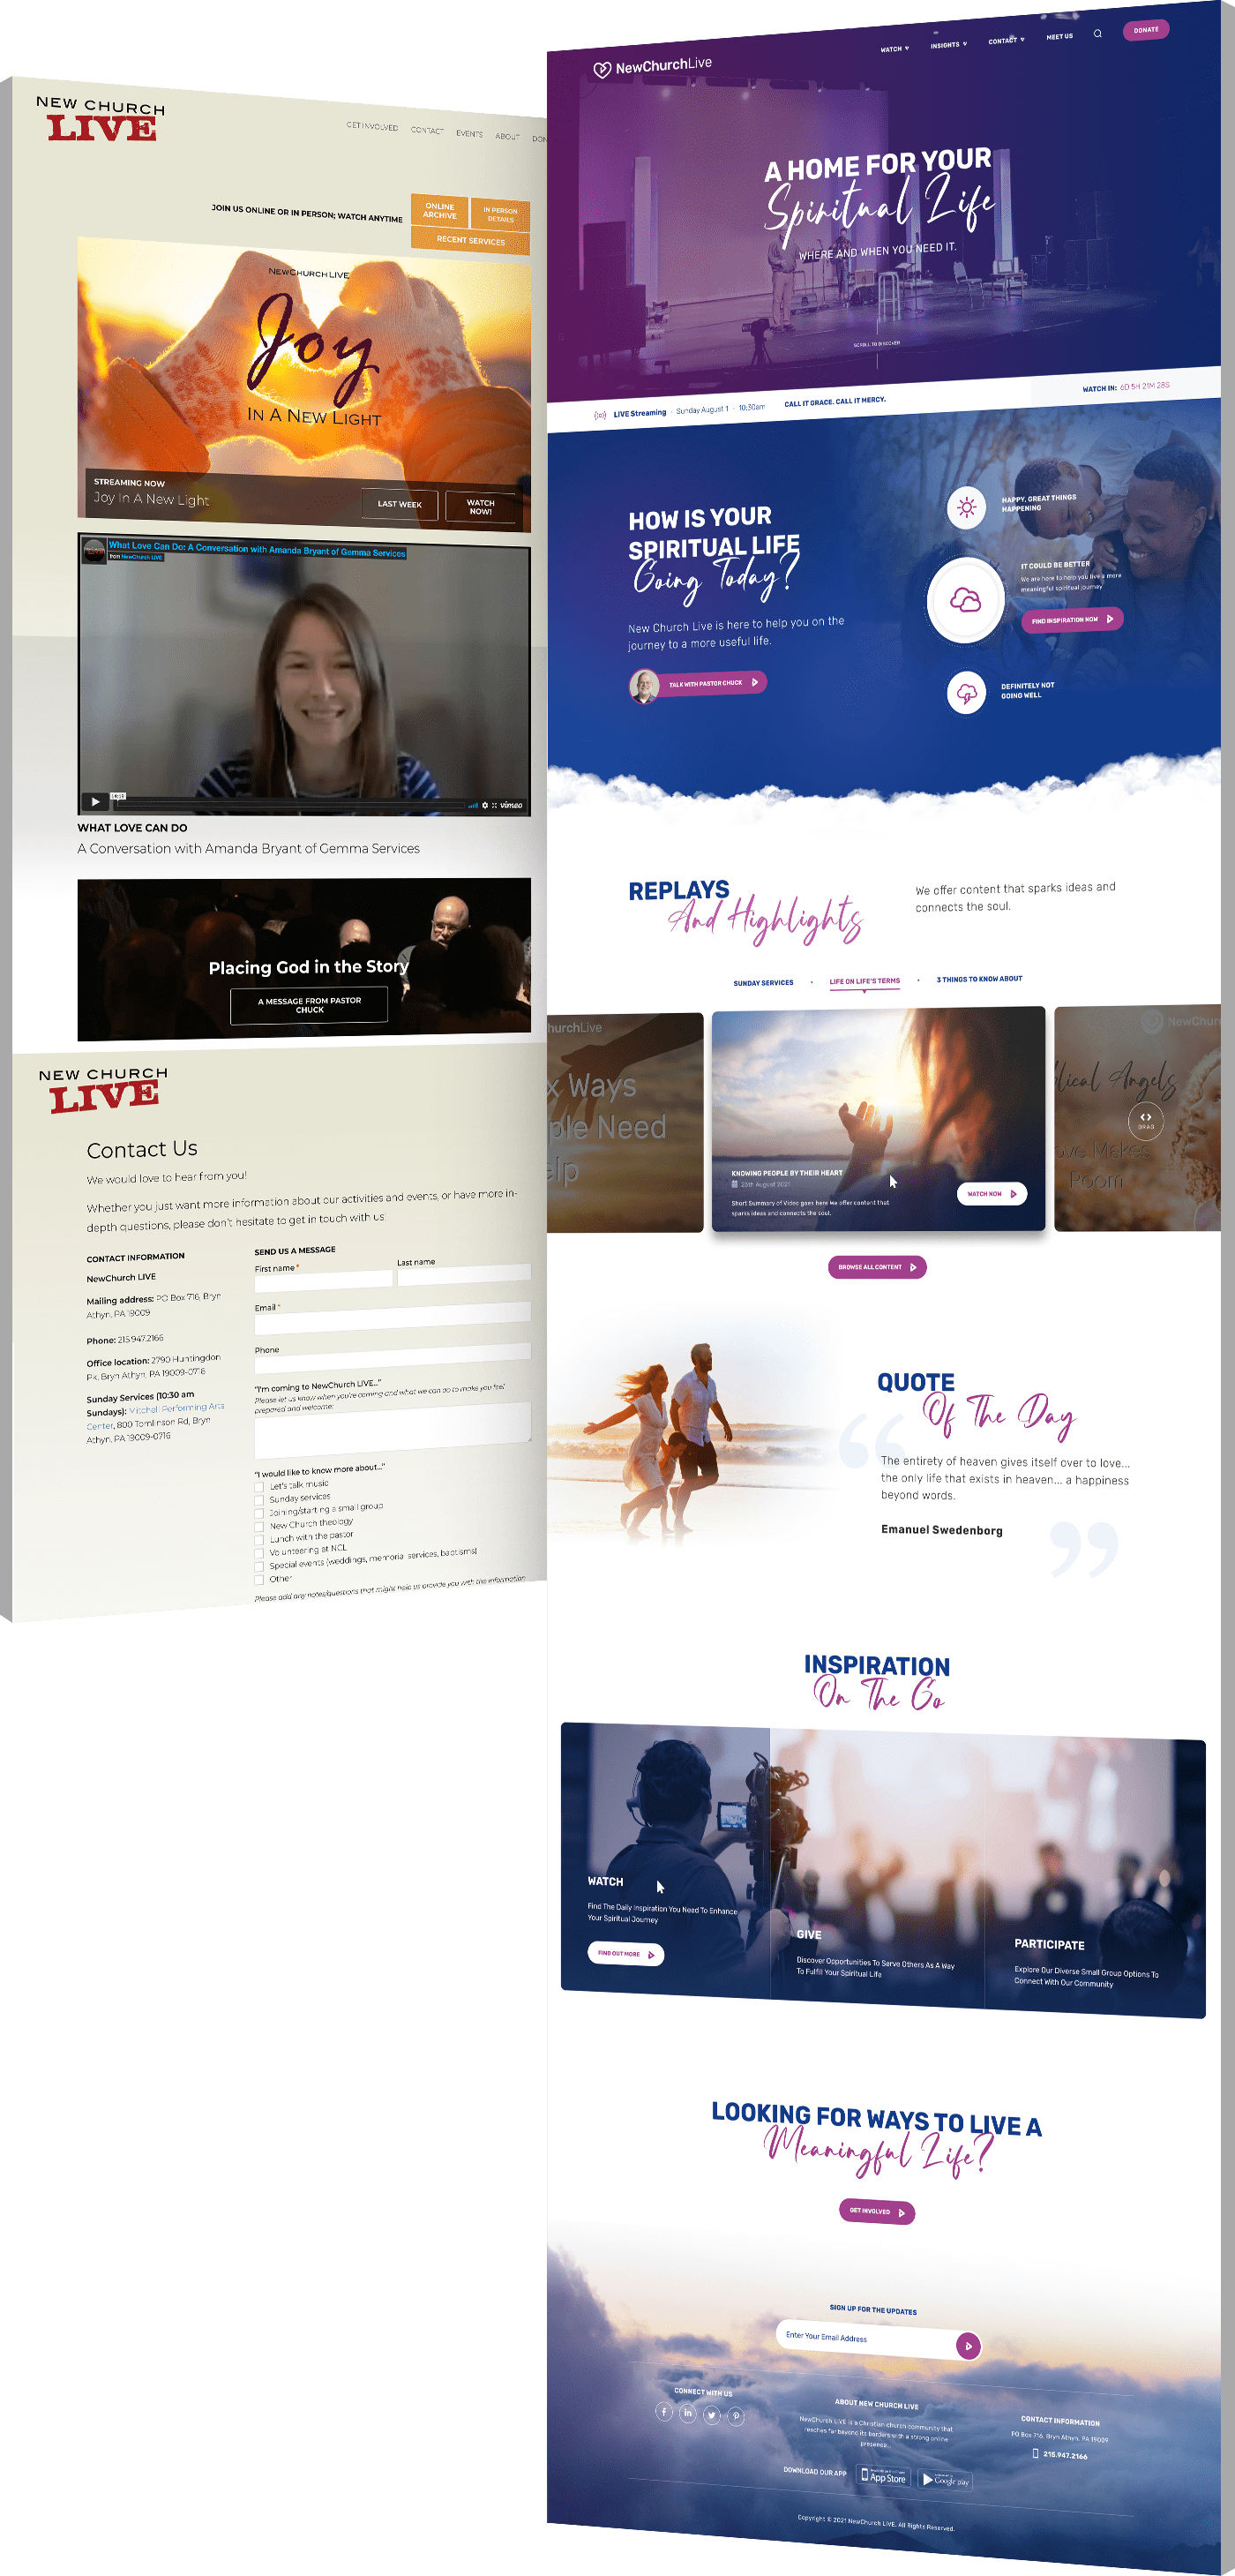 Website redesign before and after New Church Live